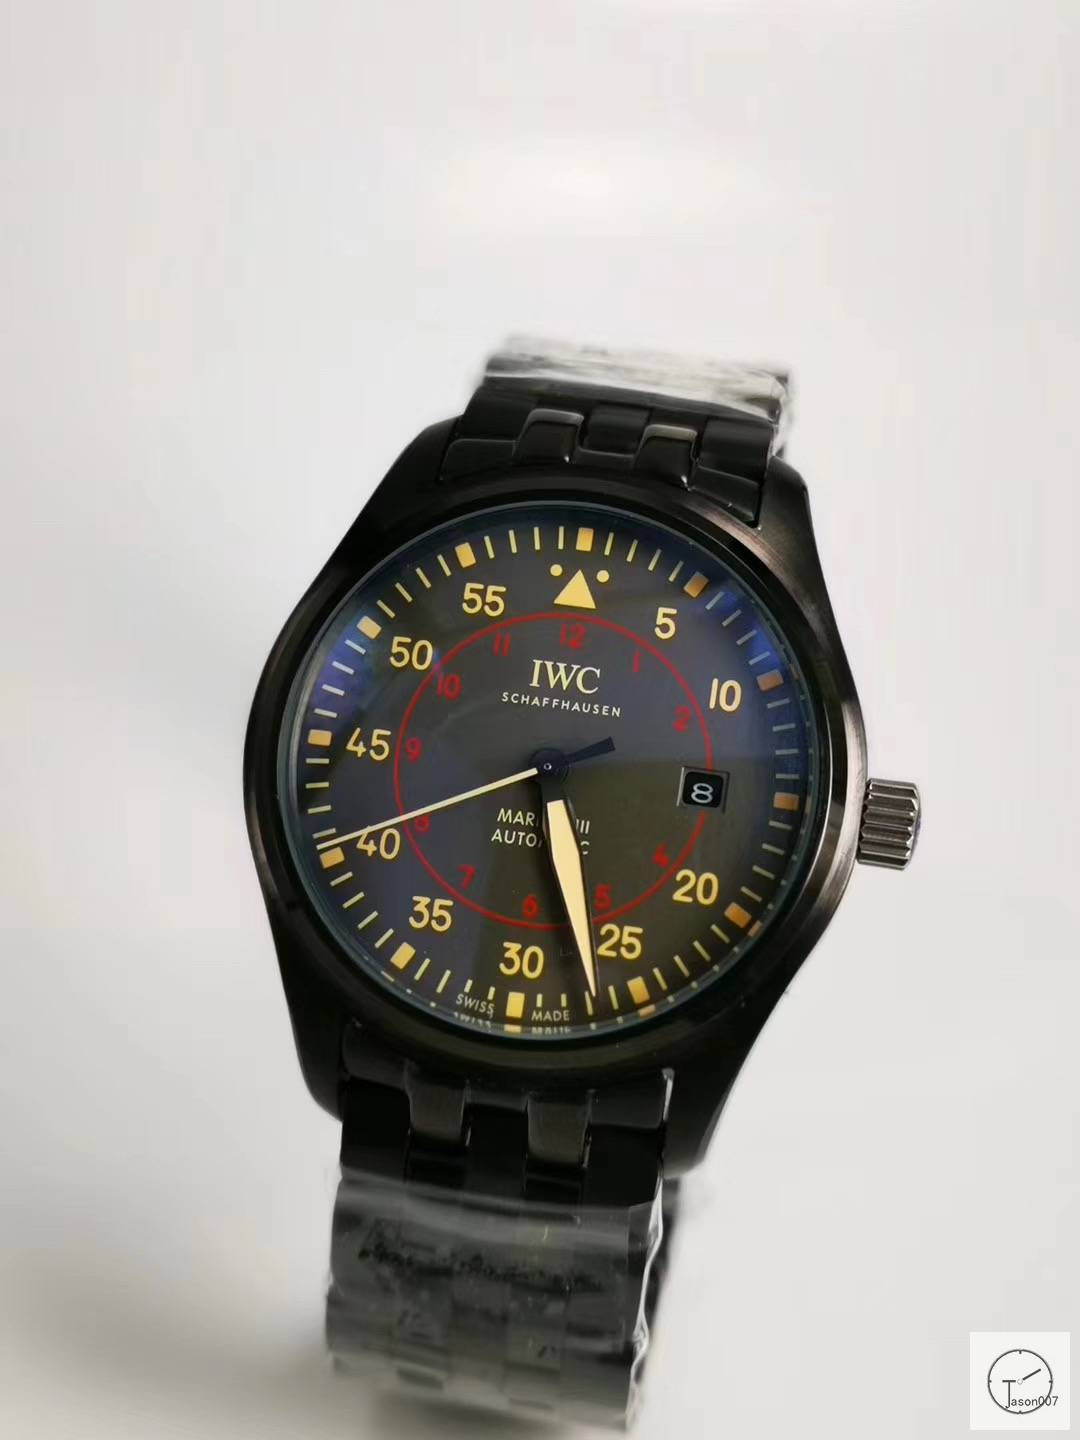 IWC PILOT'S SCHAFFHAUSEN Black Dial SPITFIRE Mark XV2 WATCH AUTOMATIC SPITFIRE AUTOMATIC Mechical IW326801 42MM Stainless Steel Leather Strap Mens Wristwatches ICW22620560